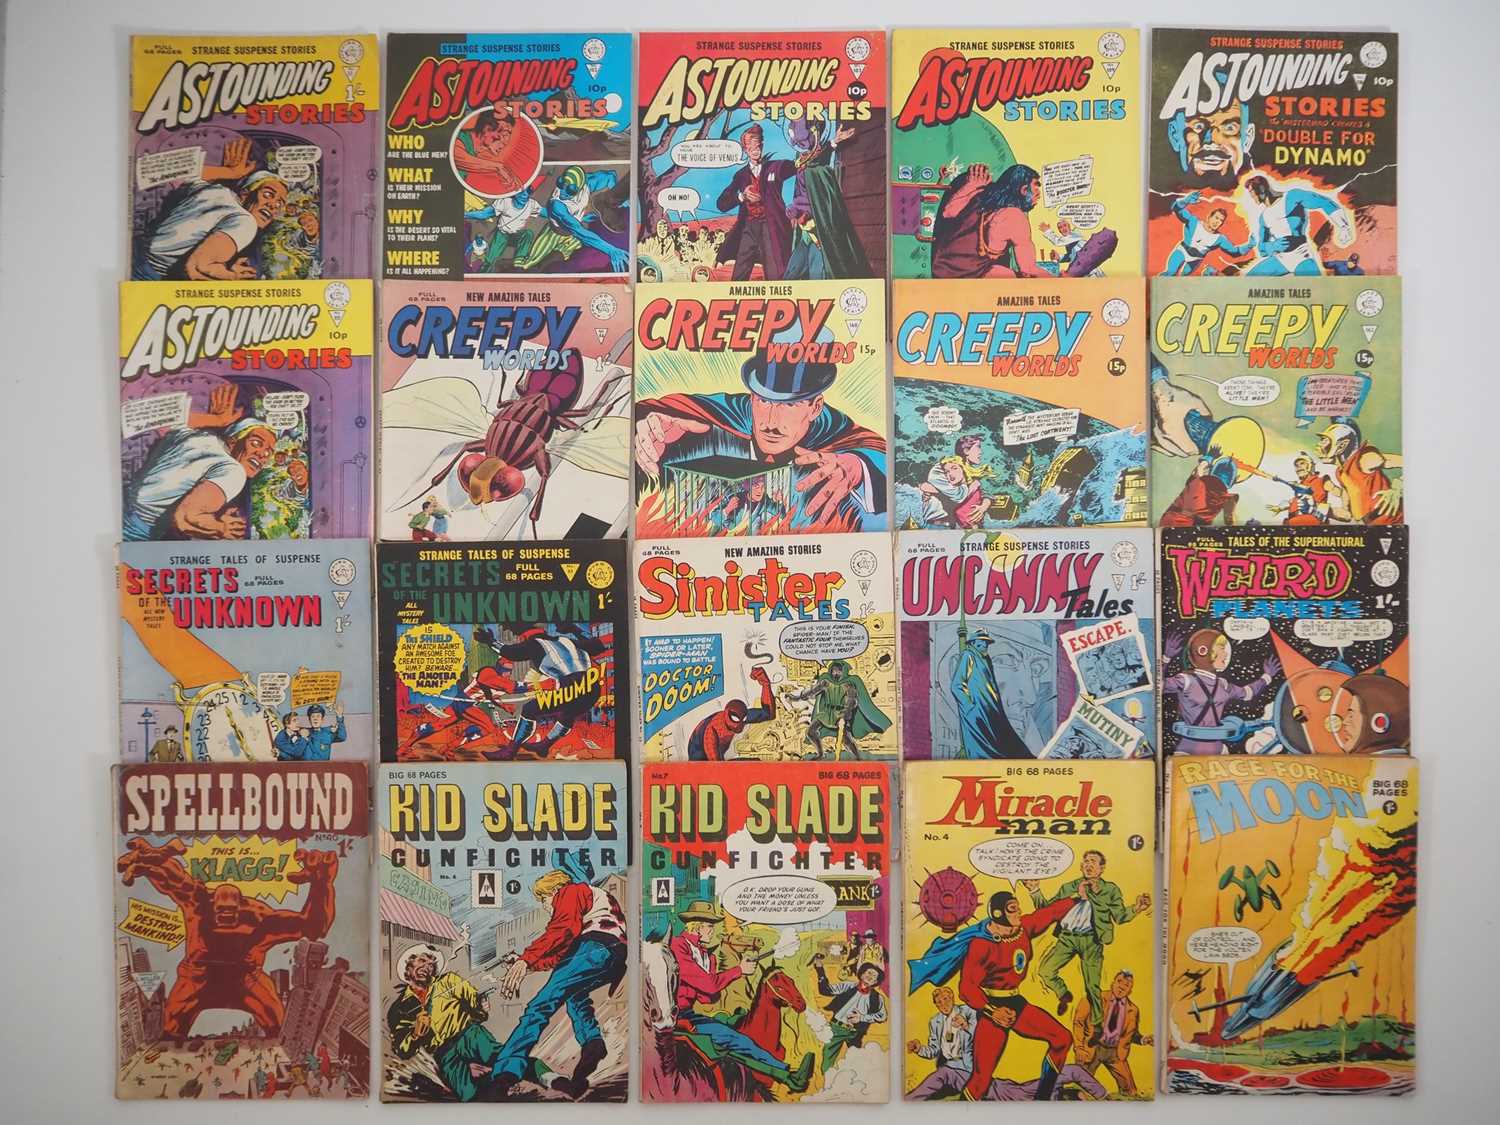 MIXED UK REPRINT LOT (20 in Lot) - Includes the following ALAN CLASS issues: ASTOUNDING STORIES #11,